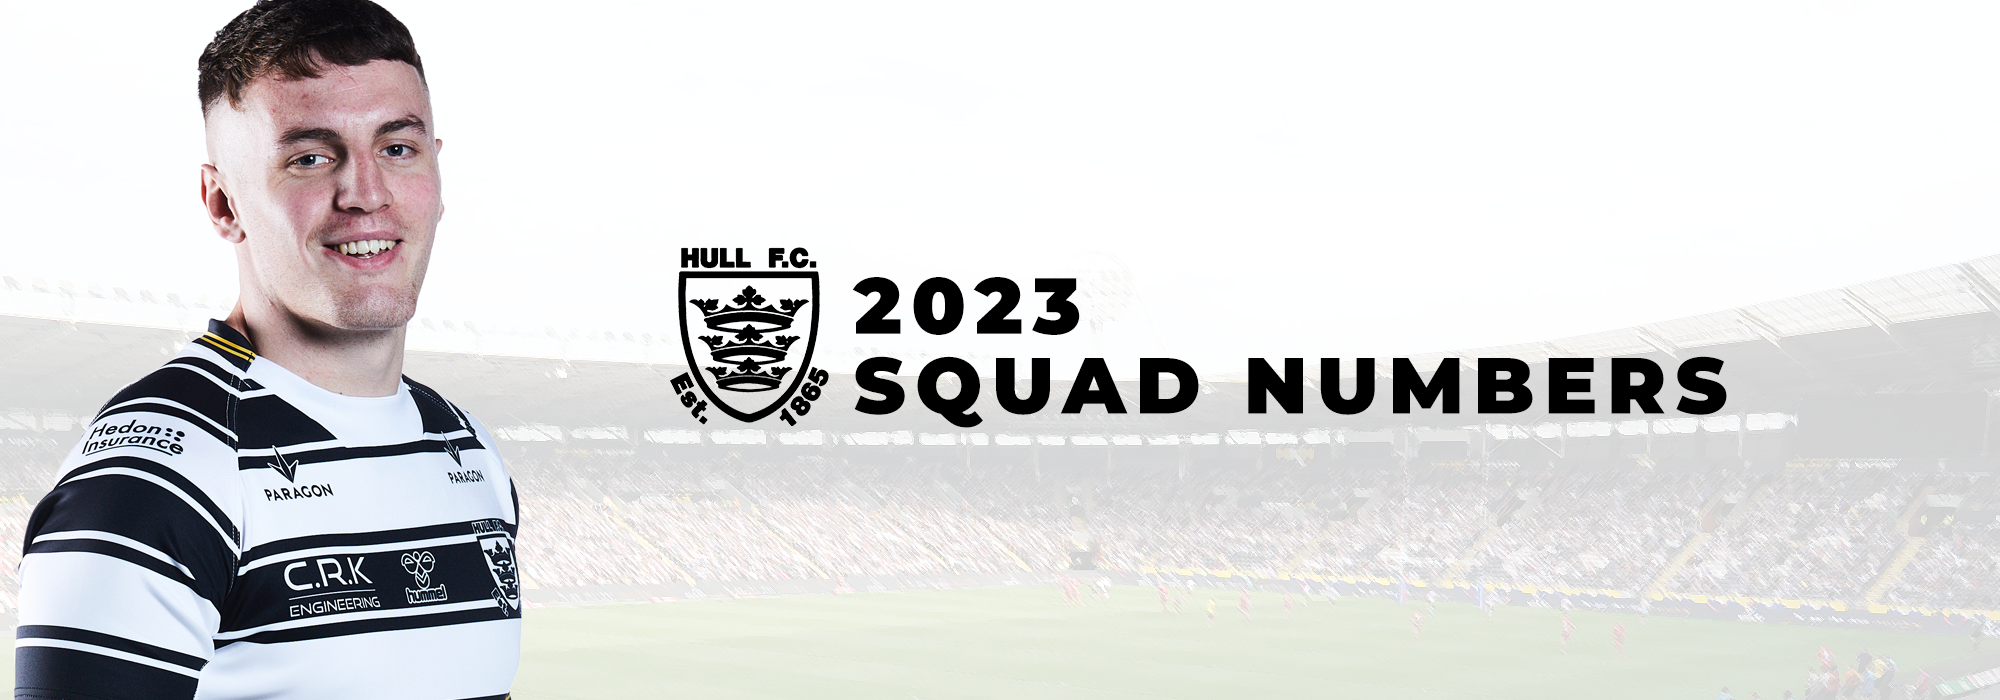 Hull FC Reveal 2023 Squad Numbers